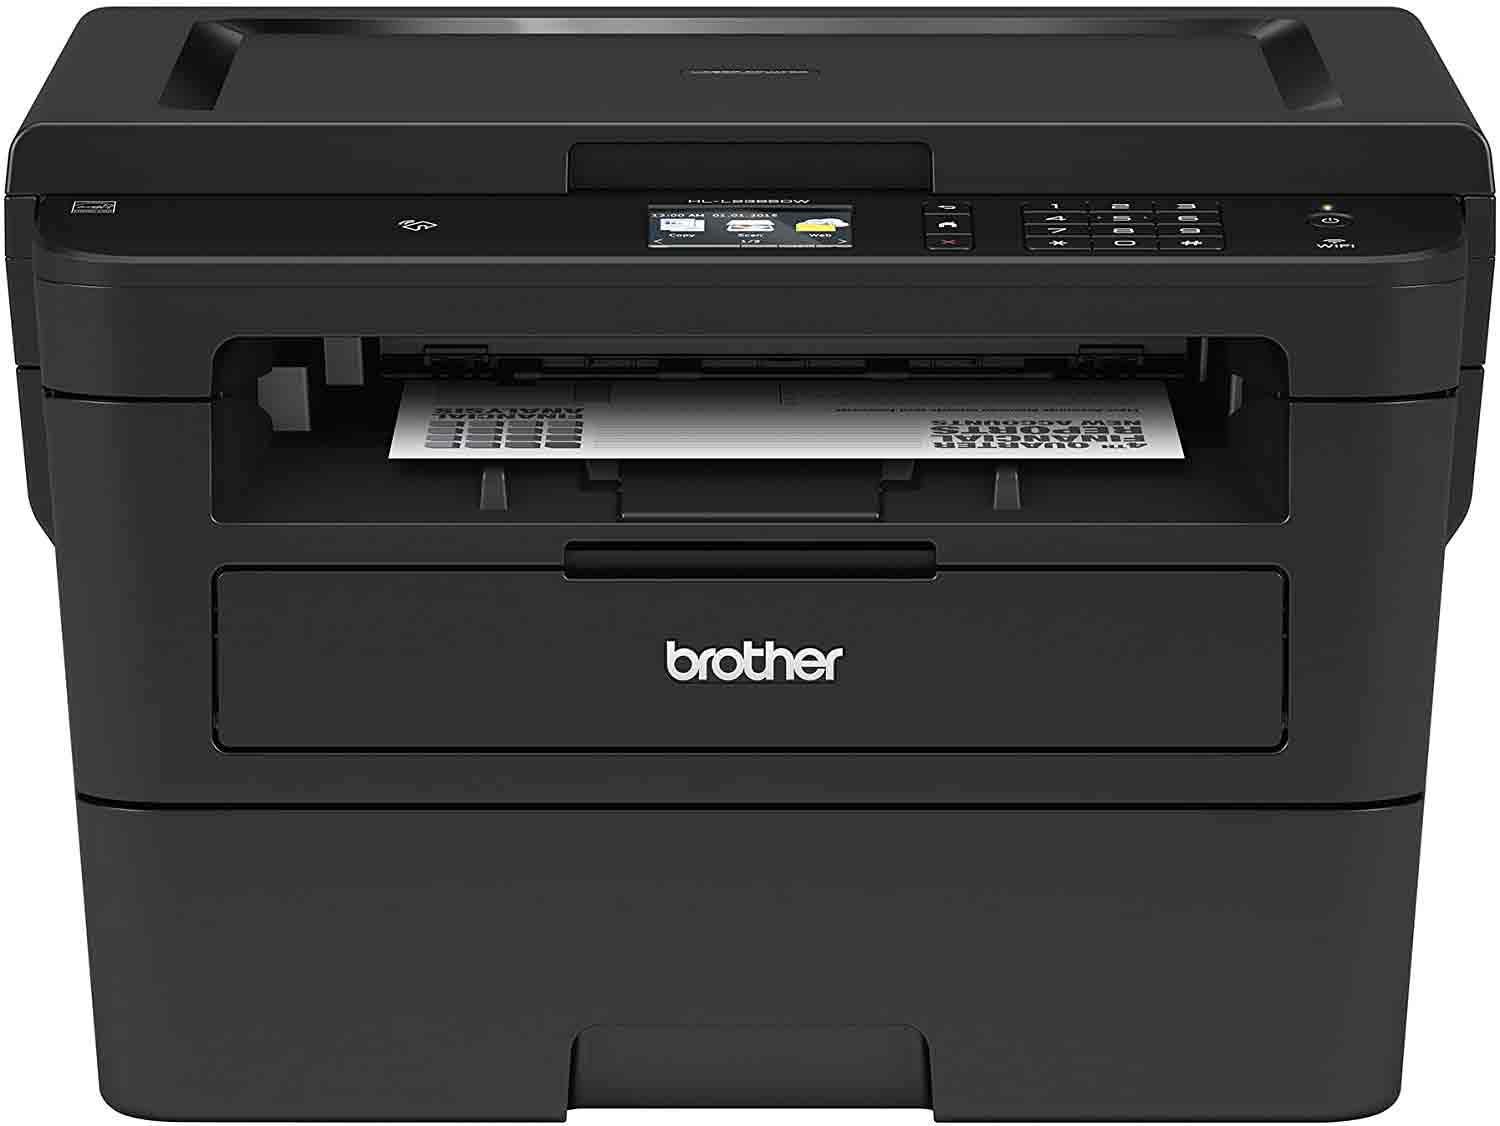 Brother Compact Monochrome Laser Printer, HLL2395DW, Flatbed Copy & Scan, Wireless Printing, NFC, Cloud-Based Printing & Scanning, Amazon Dash Replenishment Ready - BLACK